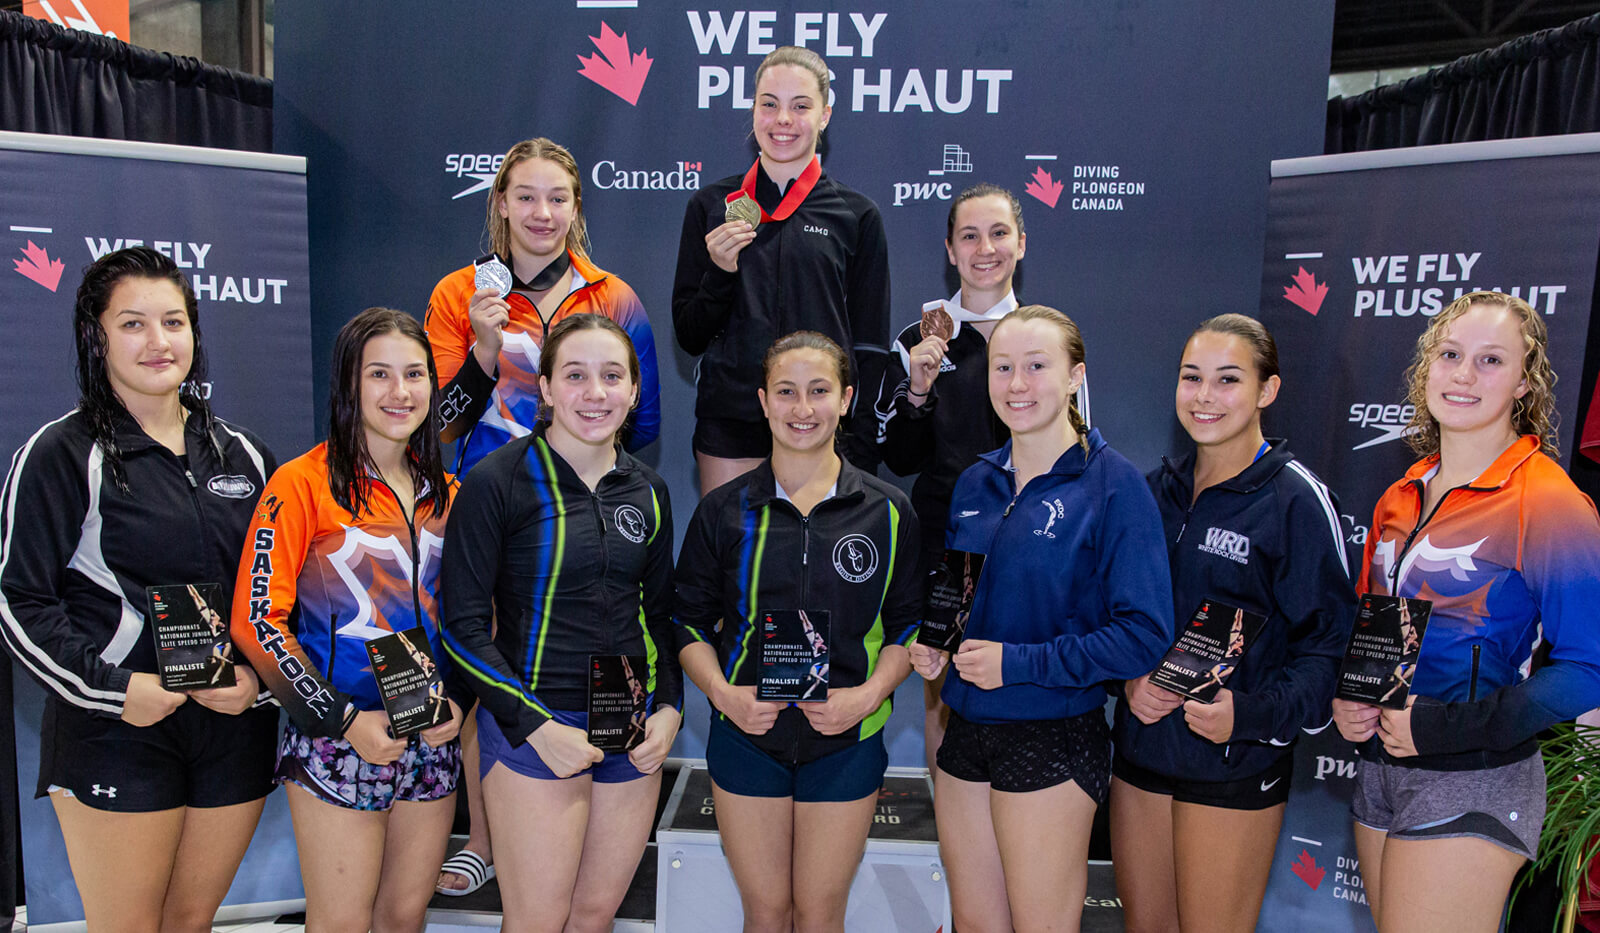 Montreal : Thomas Ciprik and Mélodie Leclerc are crowned 3m champions